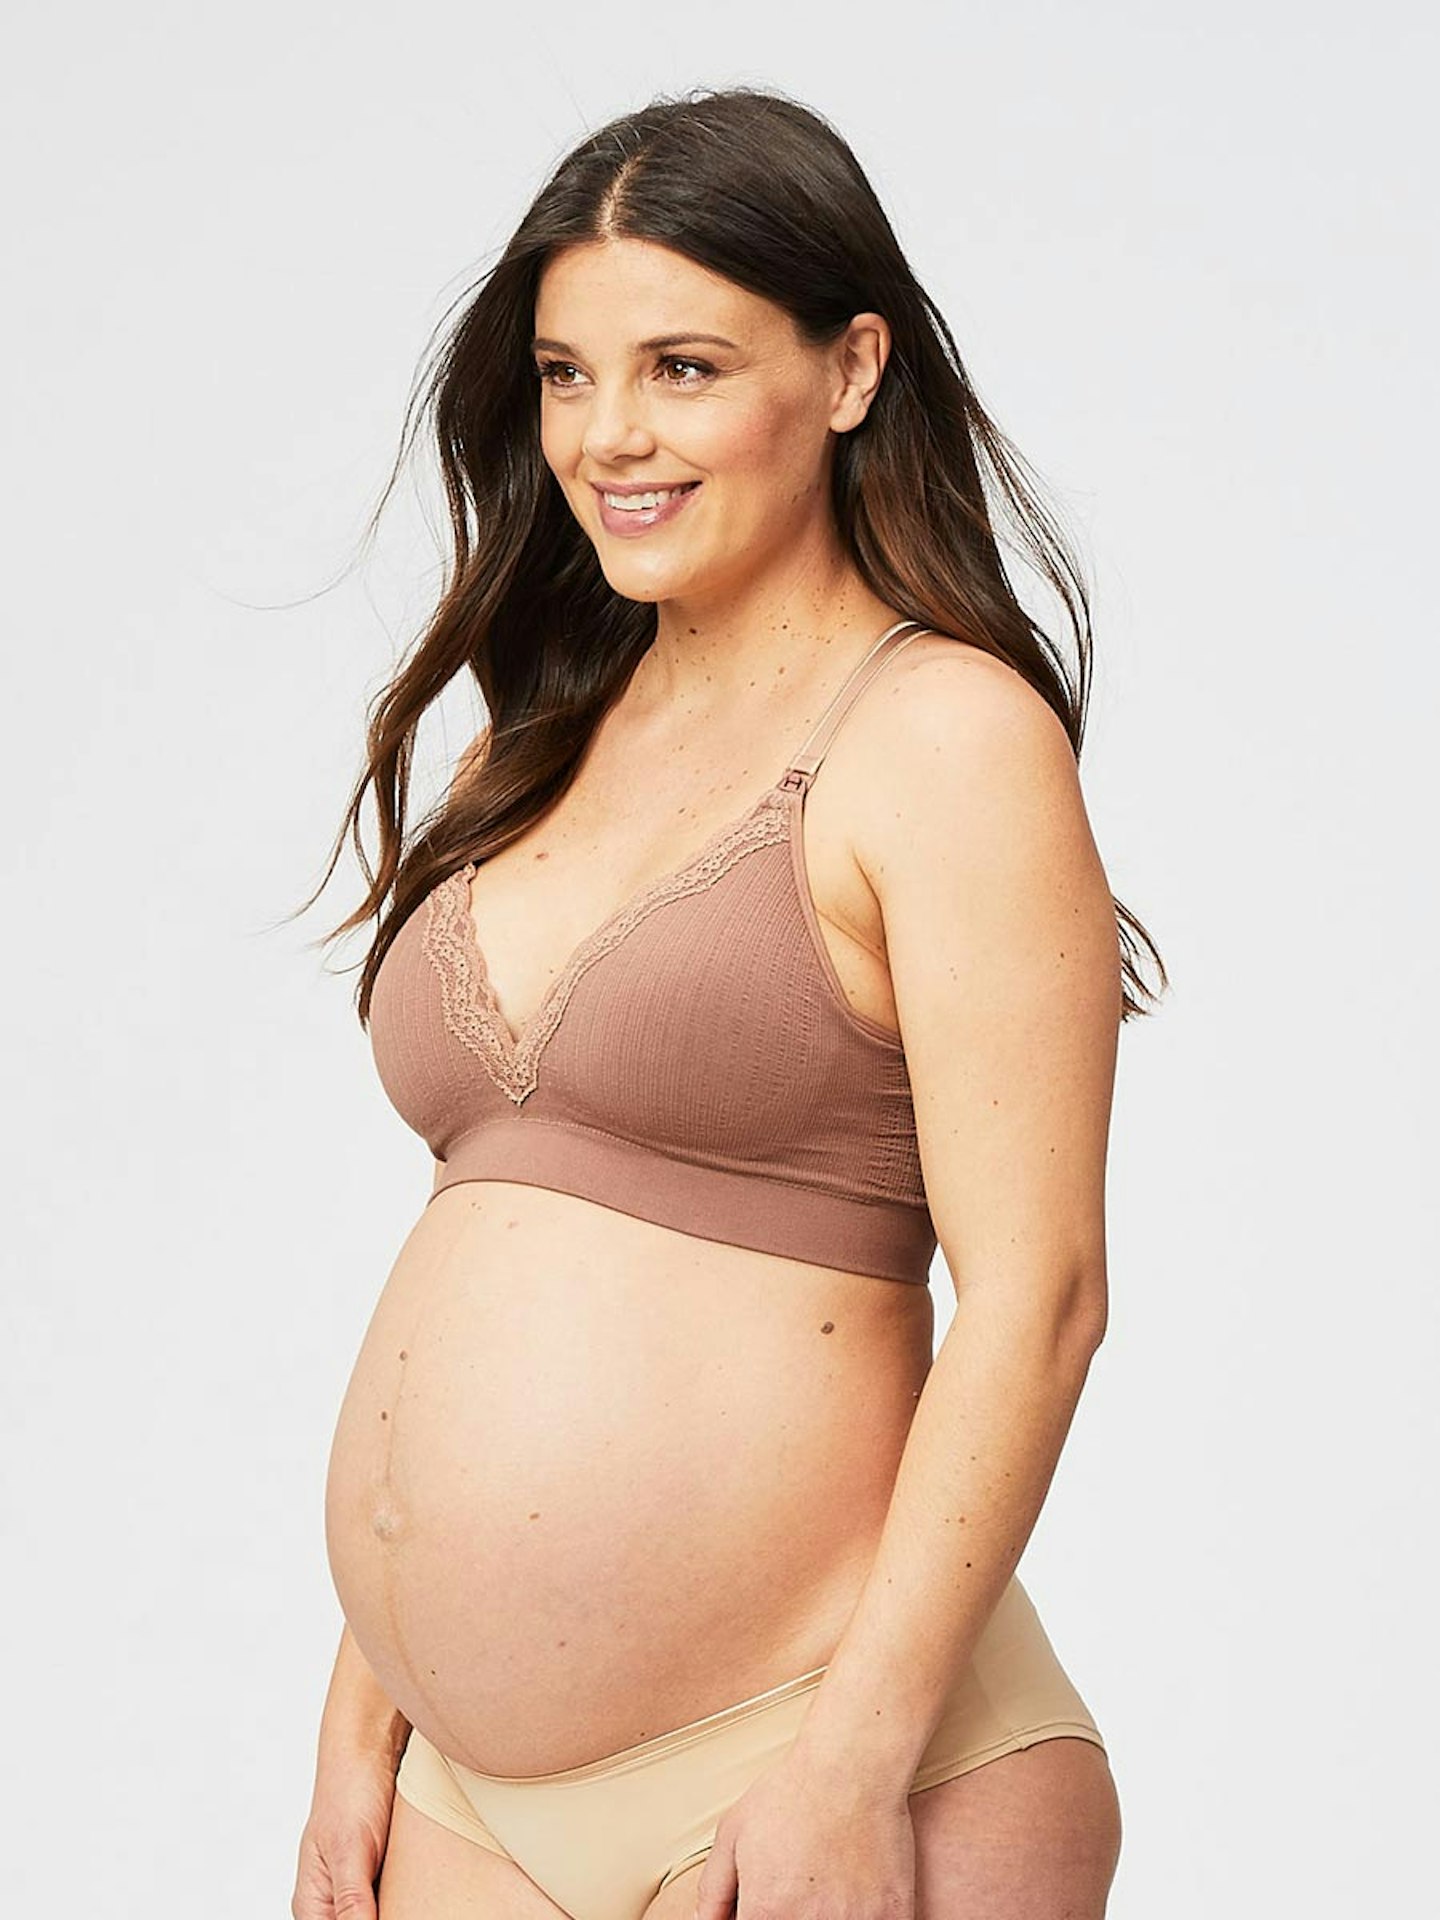 Shop For The Best Maternity Bra & Get The Best Offers